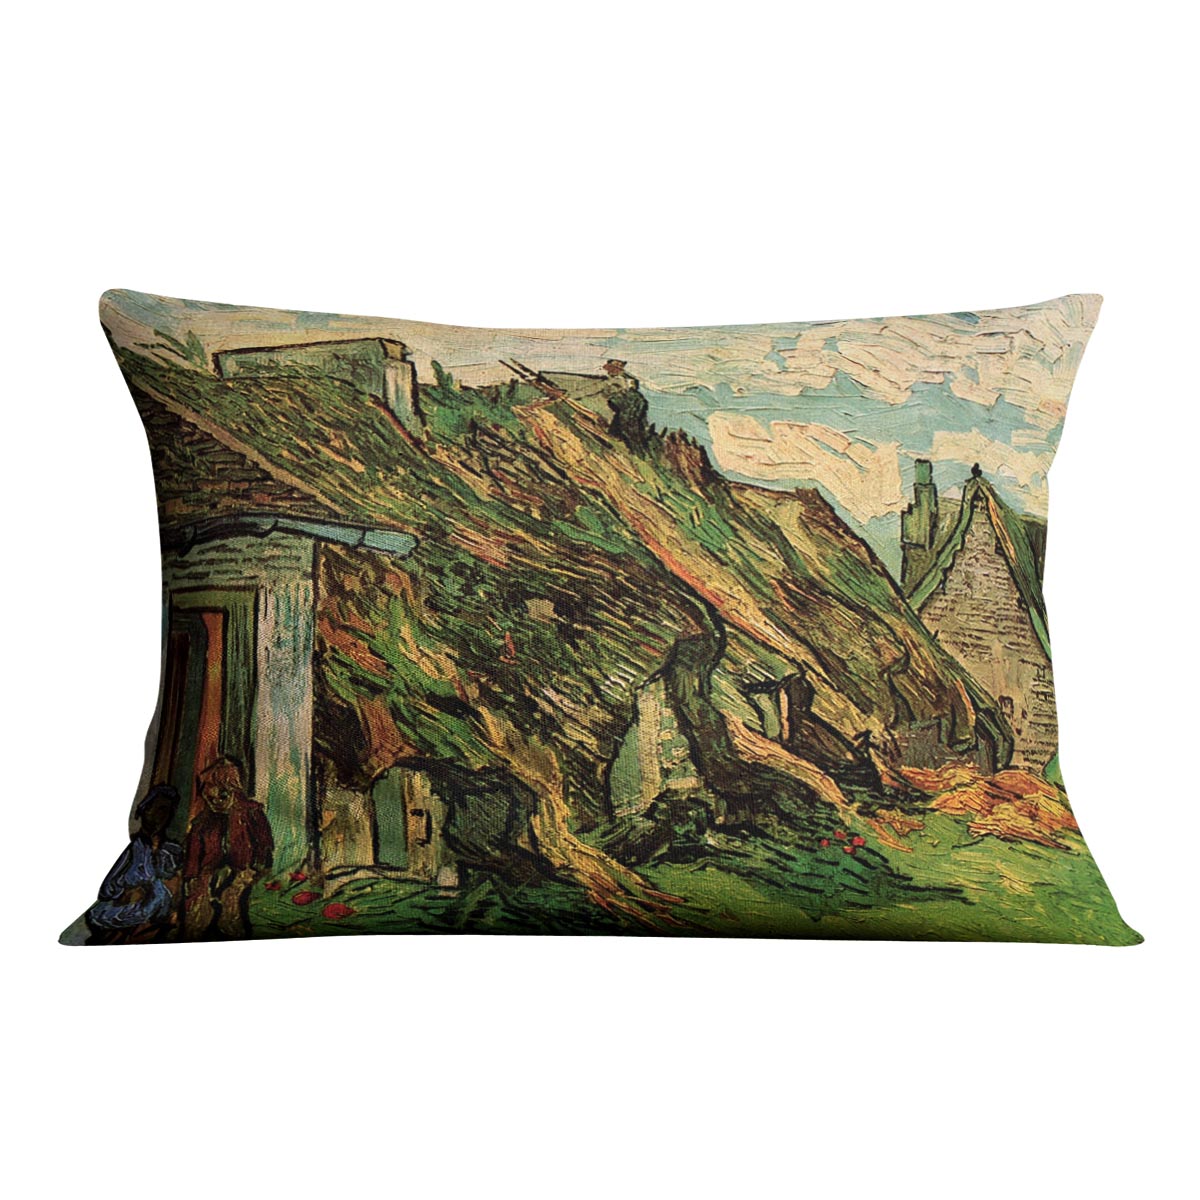 Thatched Sandstone Cottages in Chaponval by Van Gogh Cushion